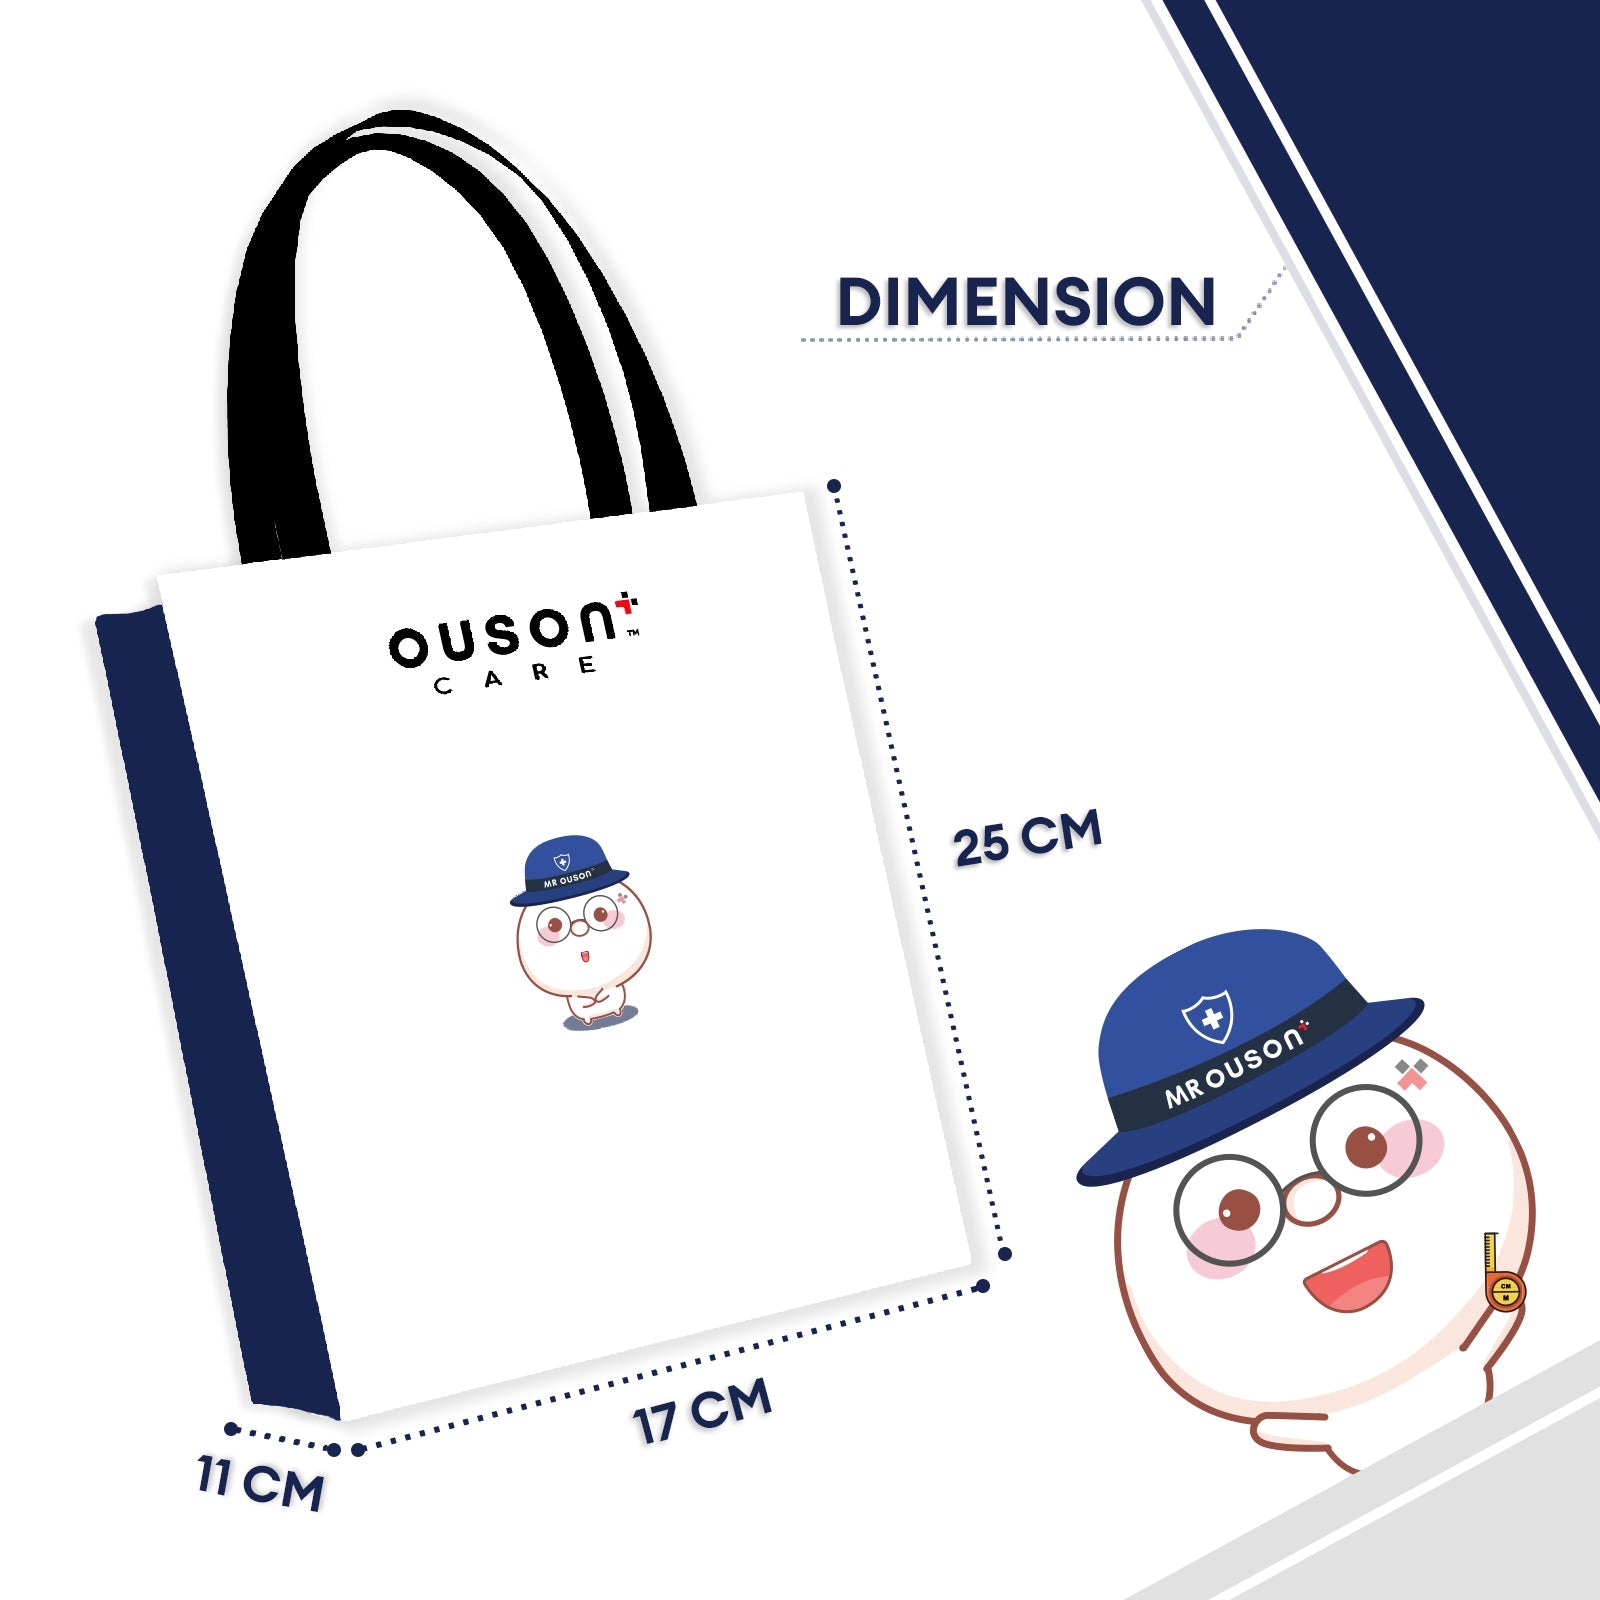 [Yellow] Mr Ouson Exclusive Tote Bag